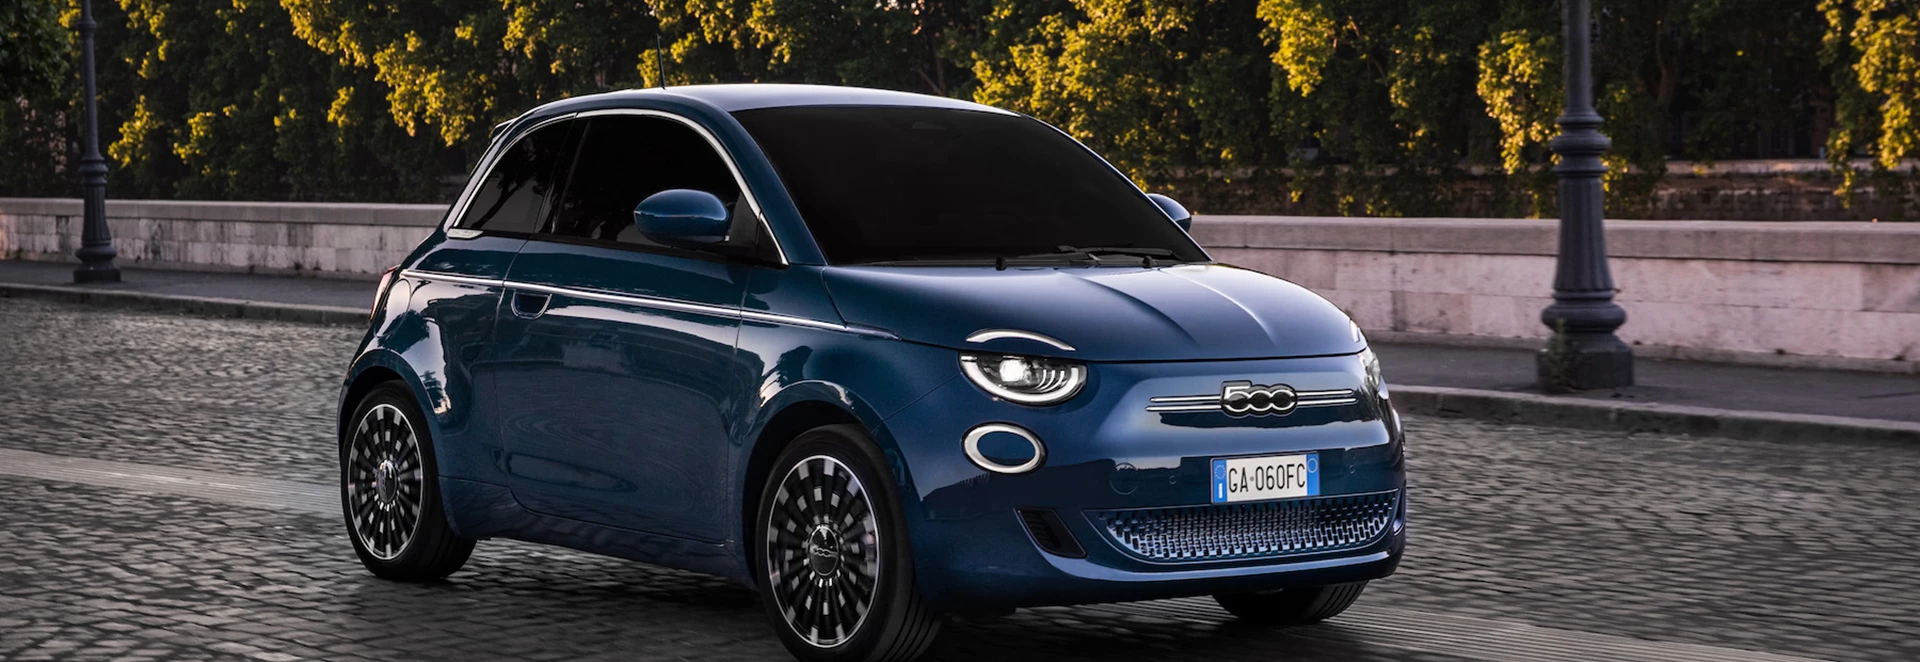 5 cool features on the new Fiat 500 Electric 